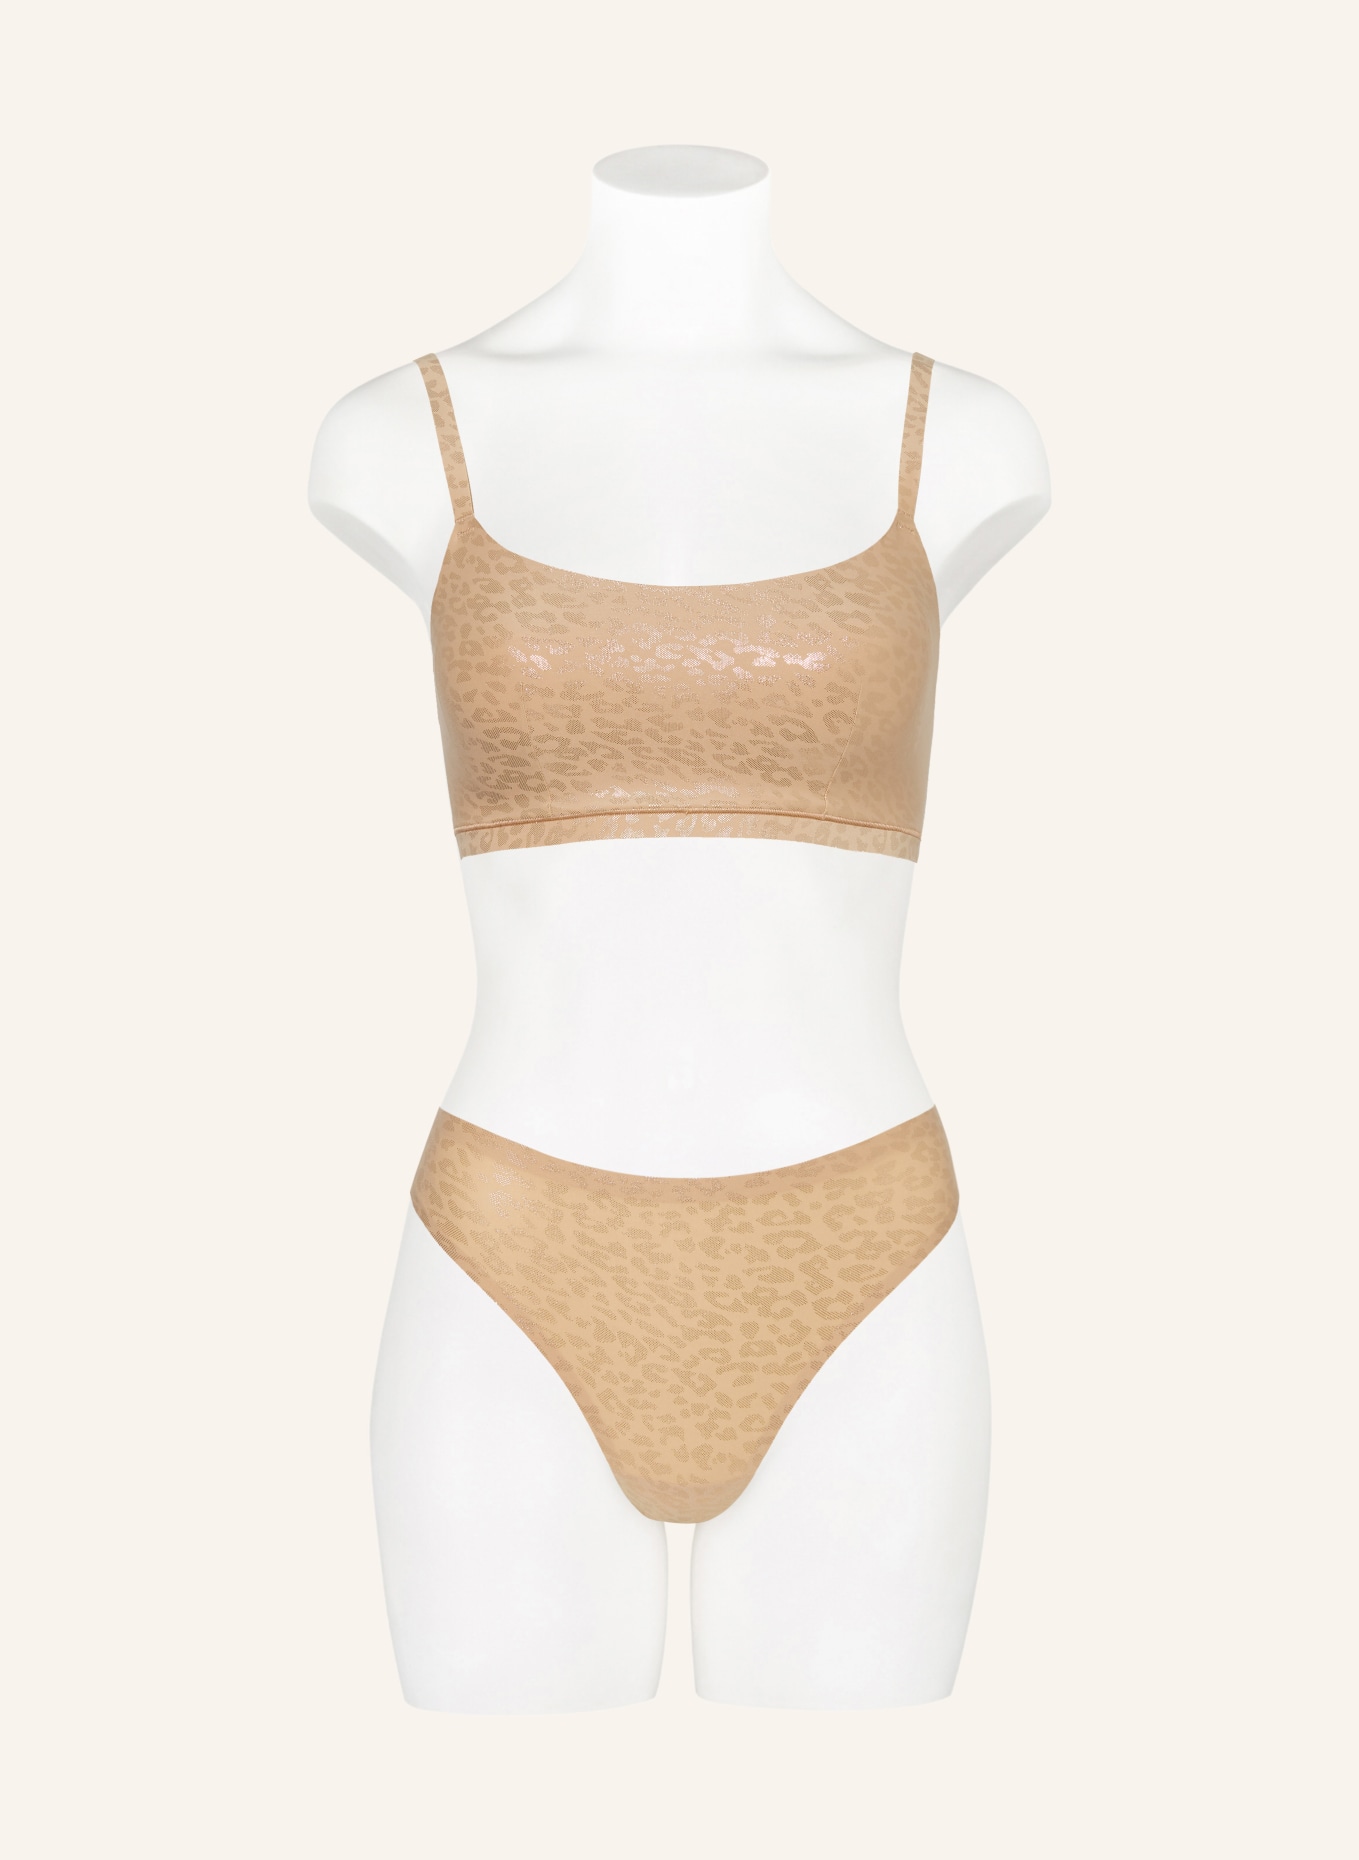 CHANTELLE Bustier SOFTSTRETCH, Farbe: NUDE/ ROSÉGOLD (Bild 2)